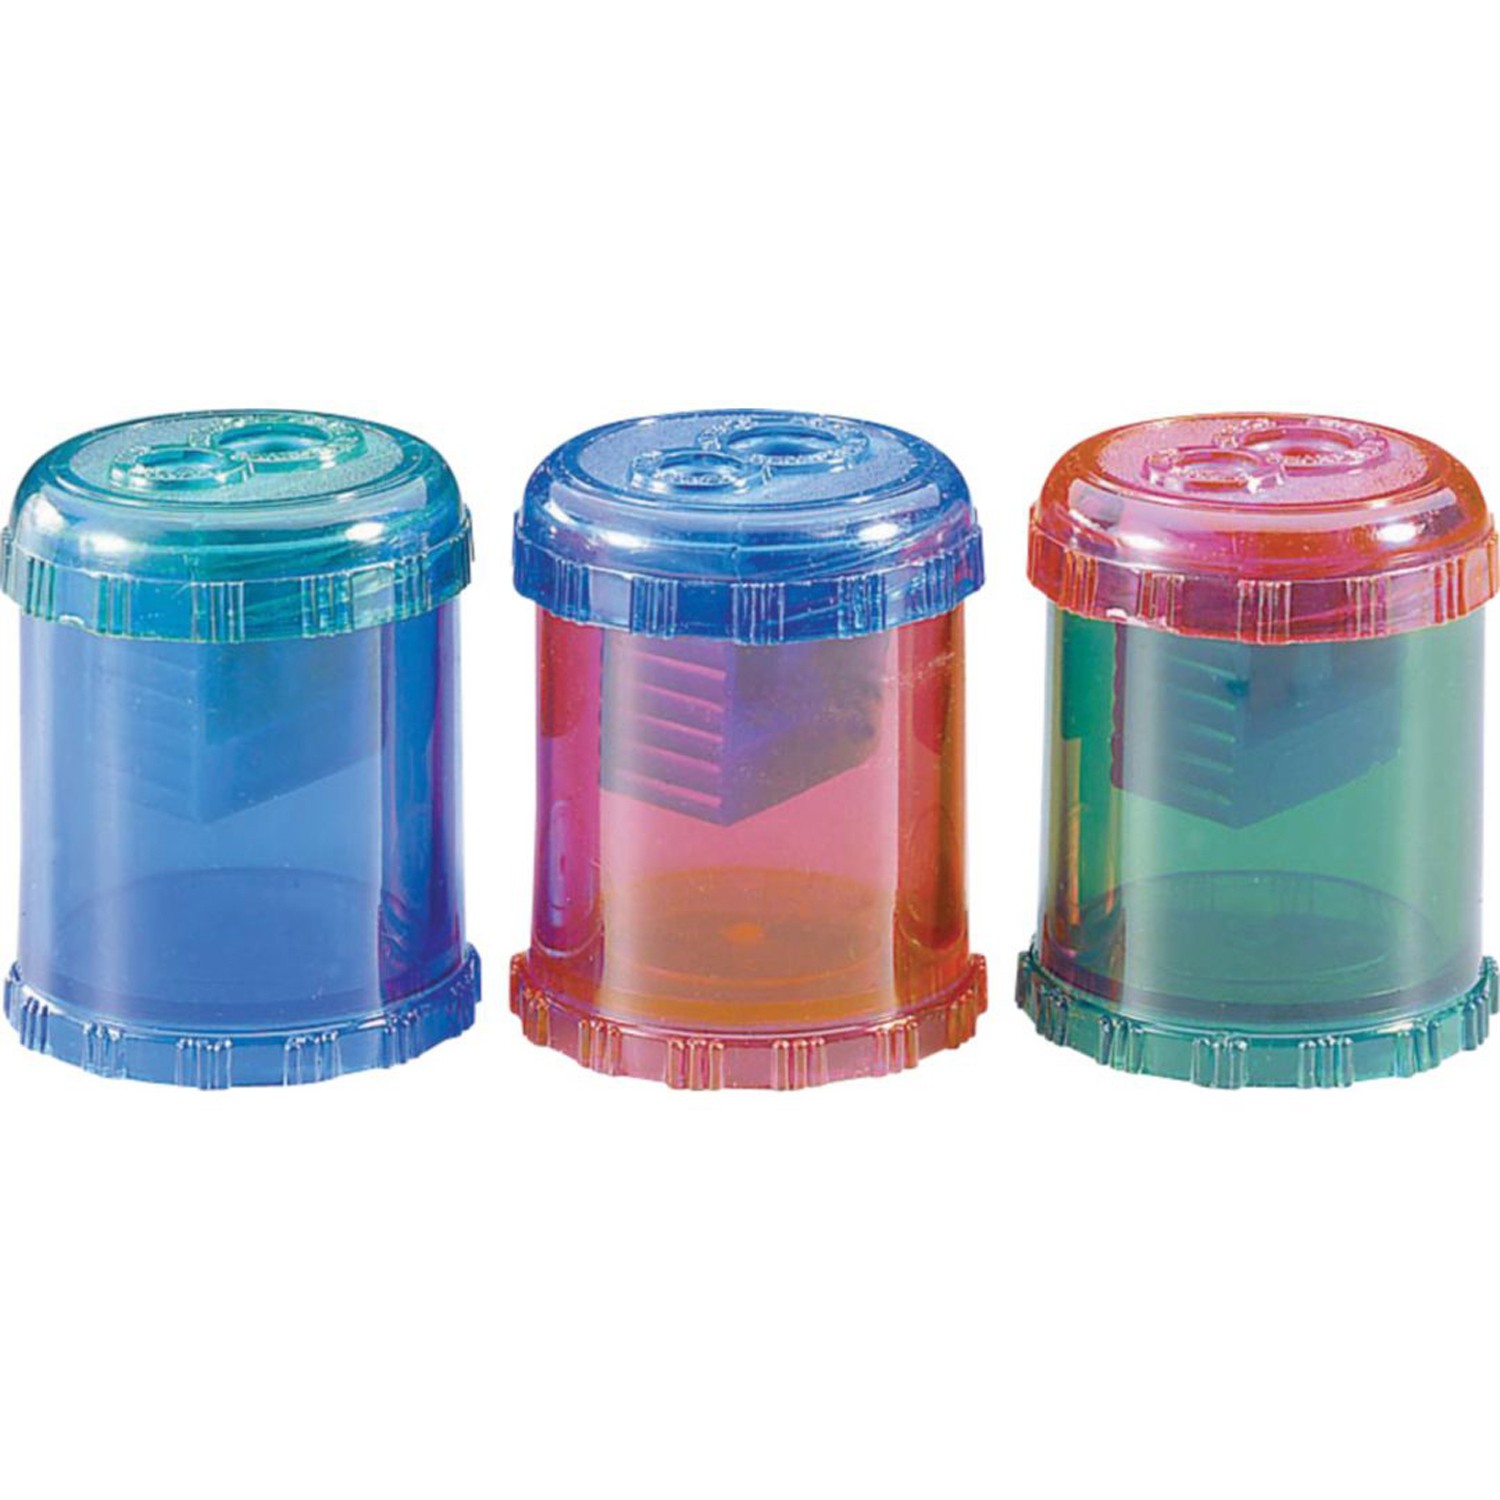 Plastic Manual Pencil and Crayon Sharpener, 2-Hole, Assorted Colors